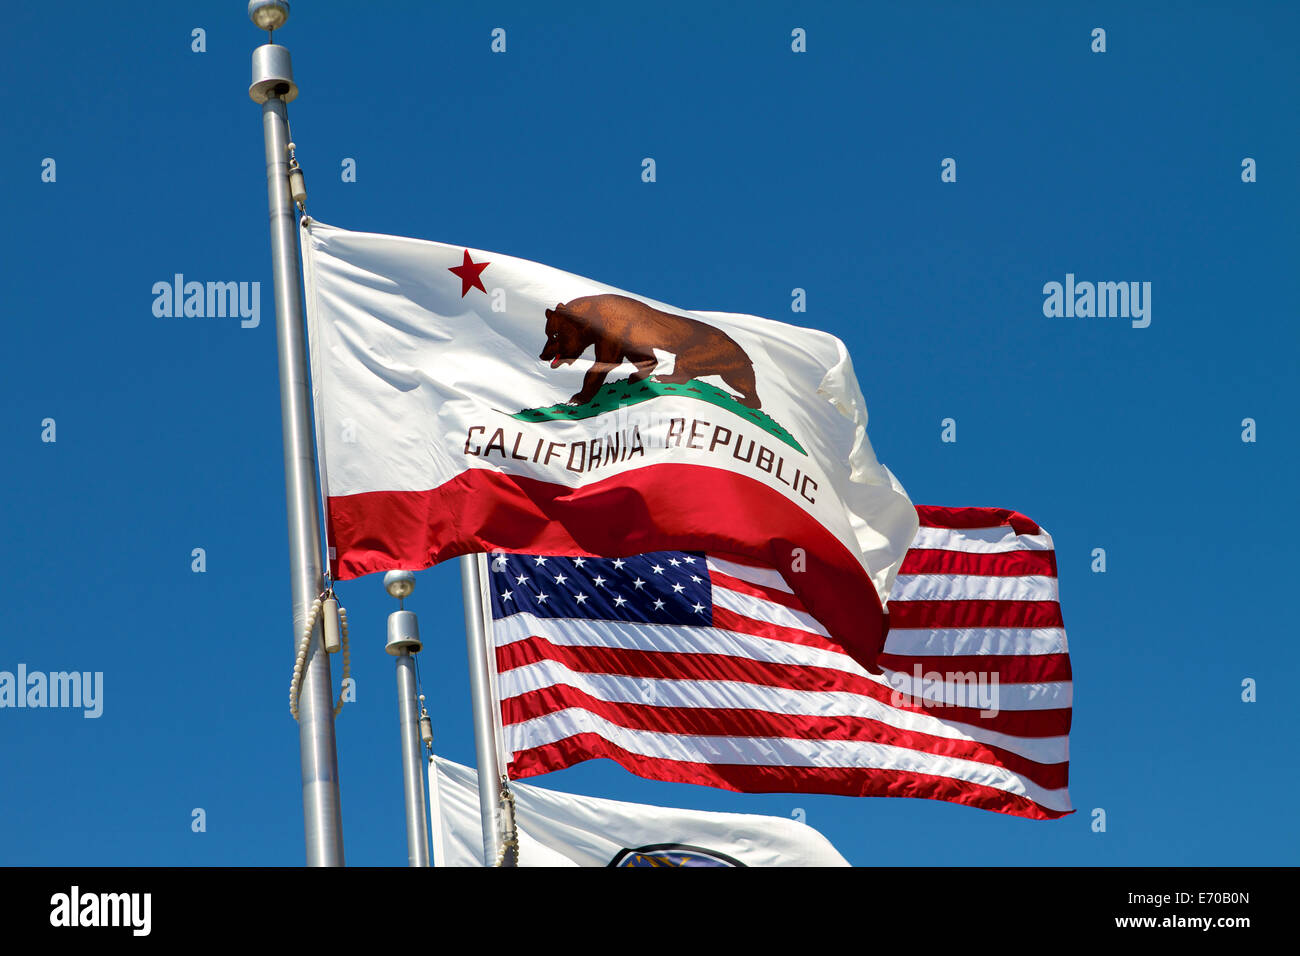 The flags of the United states of America and California fly next to each other against a vivid blue sky Stock Photo